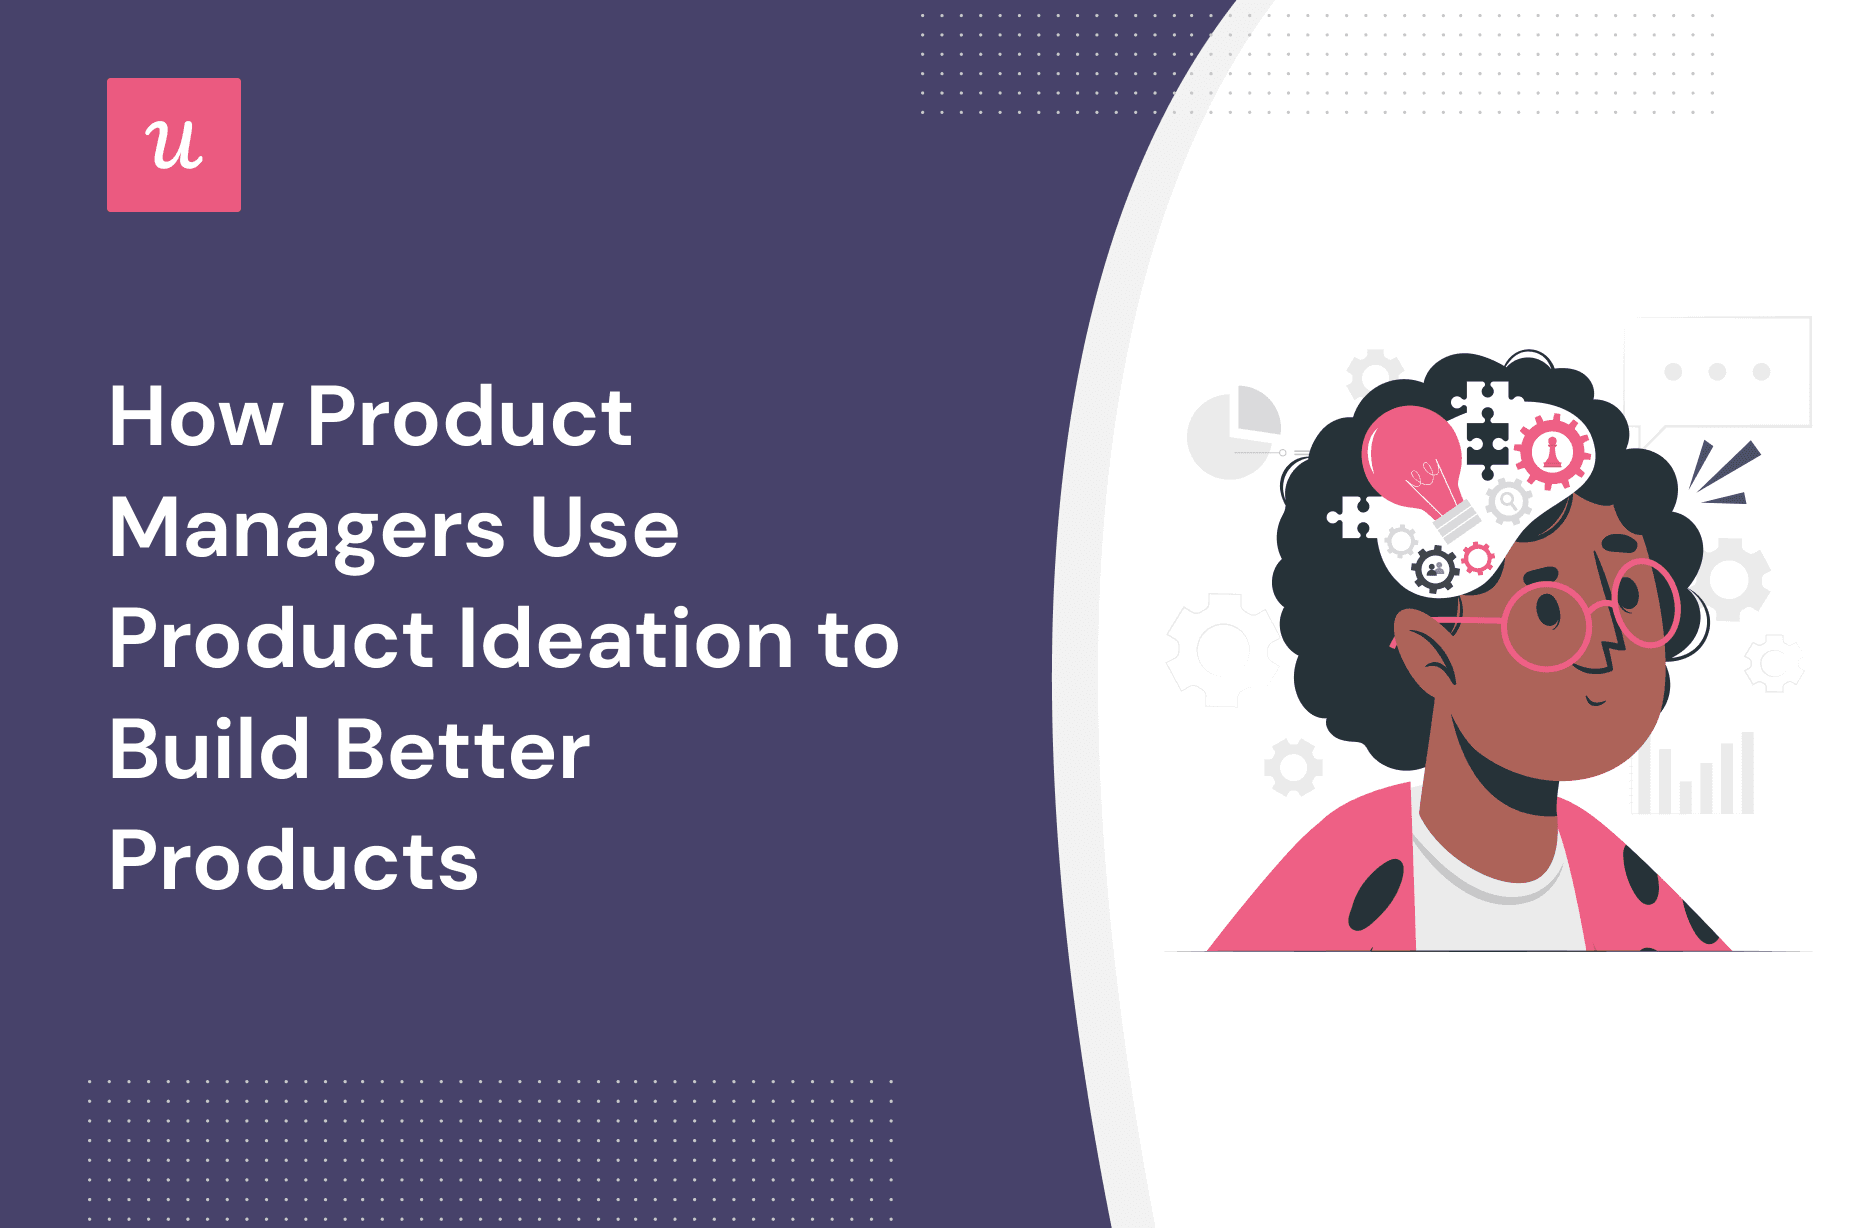 How Product Managers Use Product Ideation to Build Better Products cover